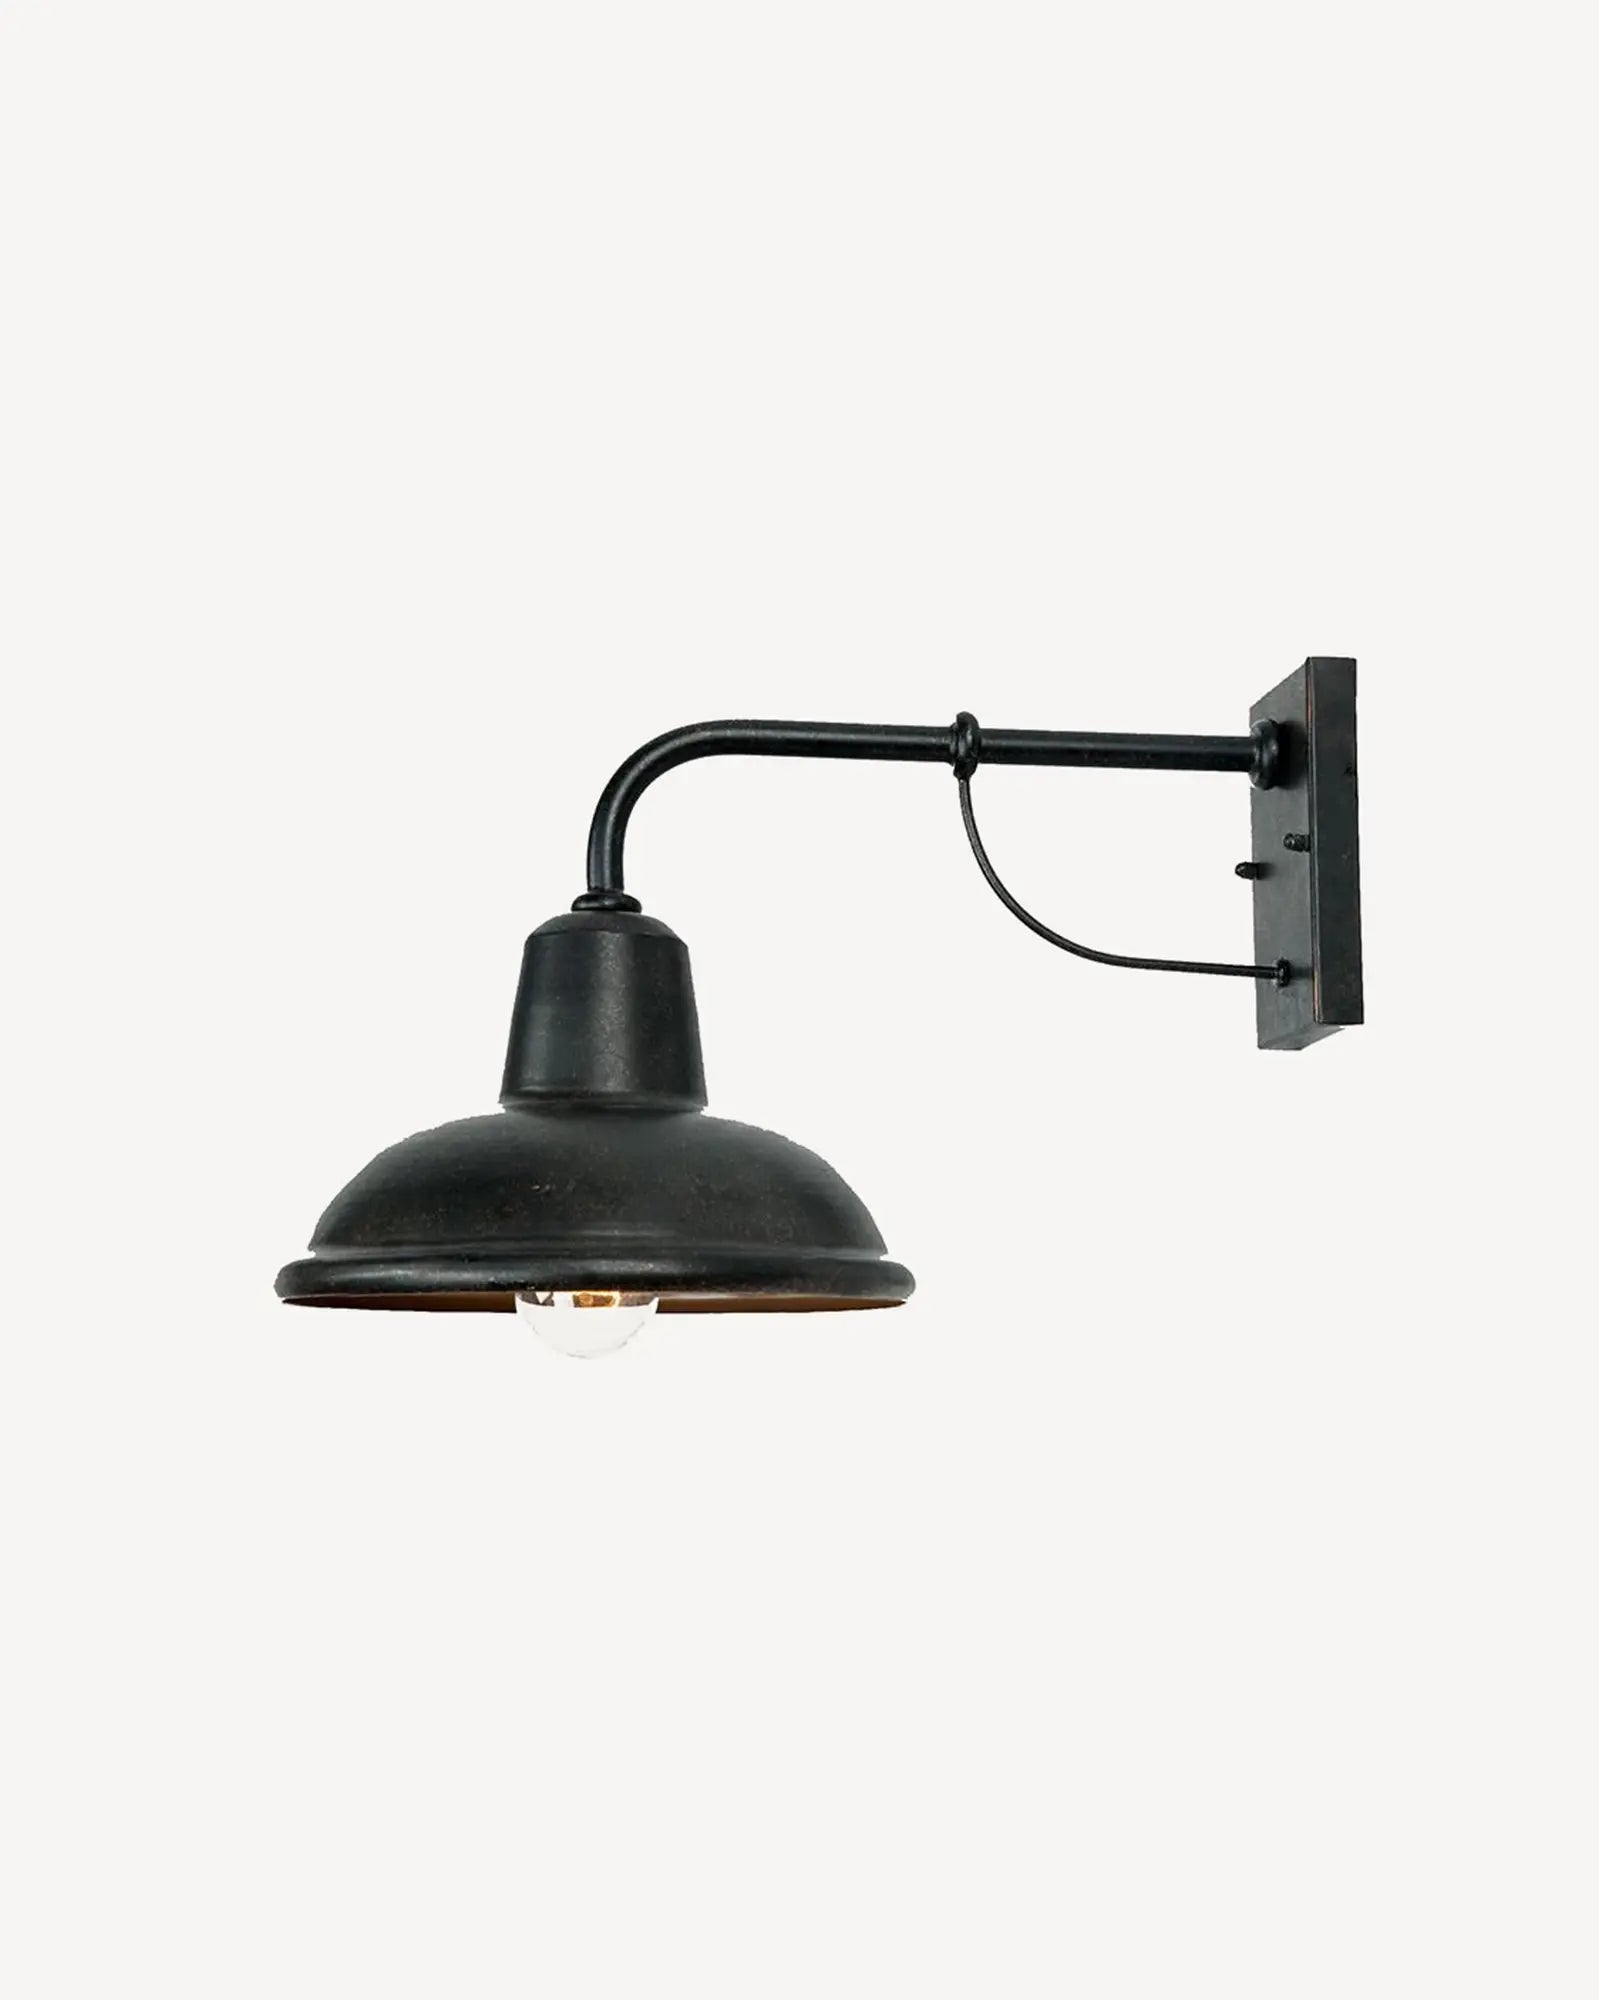 Urban Wall Light by Inspiration Light at Nook Collections